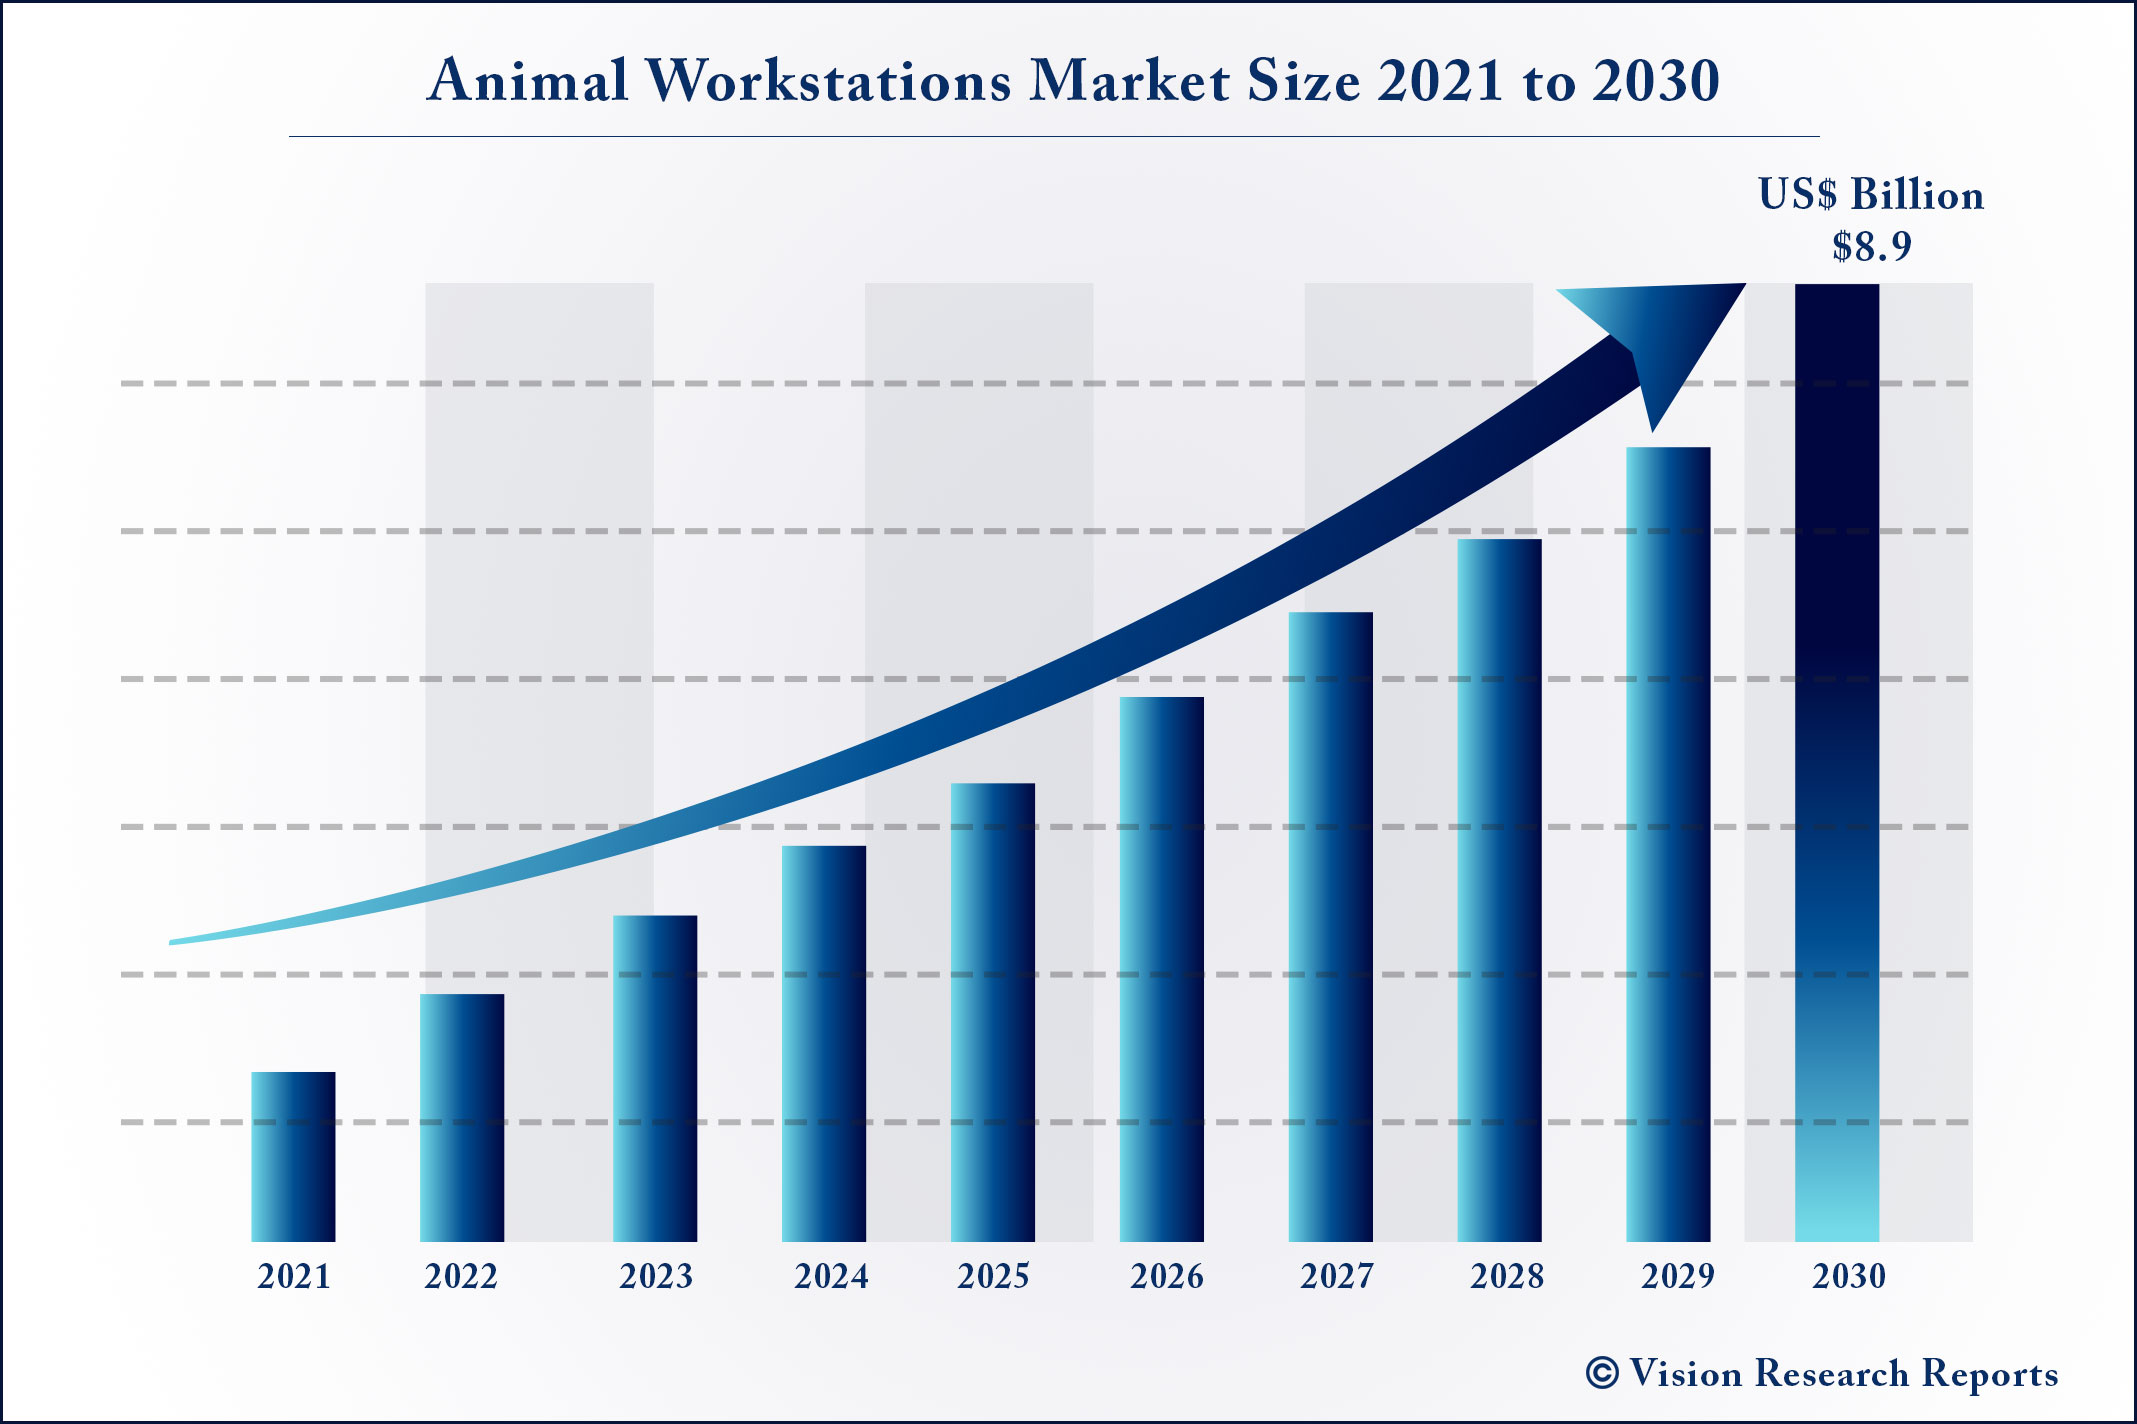 Animal Workstations Market Size 2021 to 2030